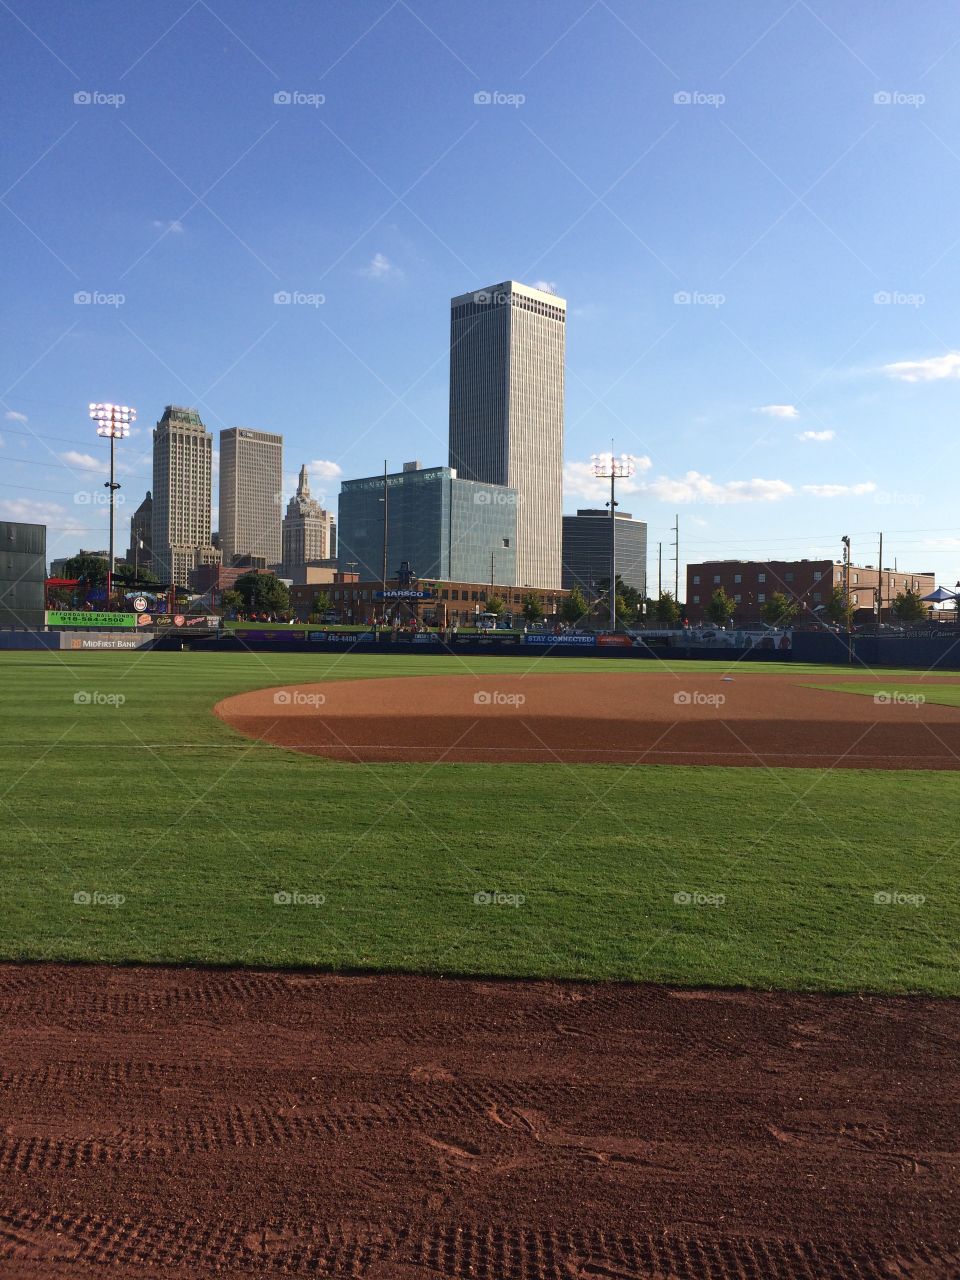 Tulsa skyline from behind the Dugout 